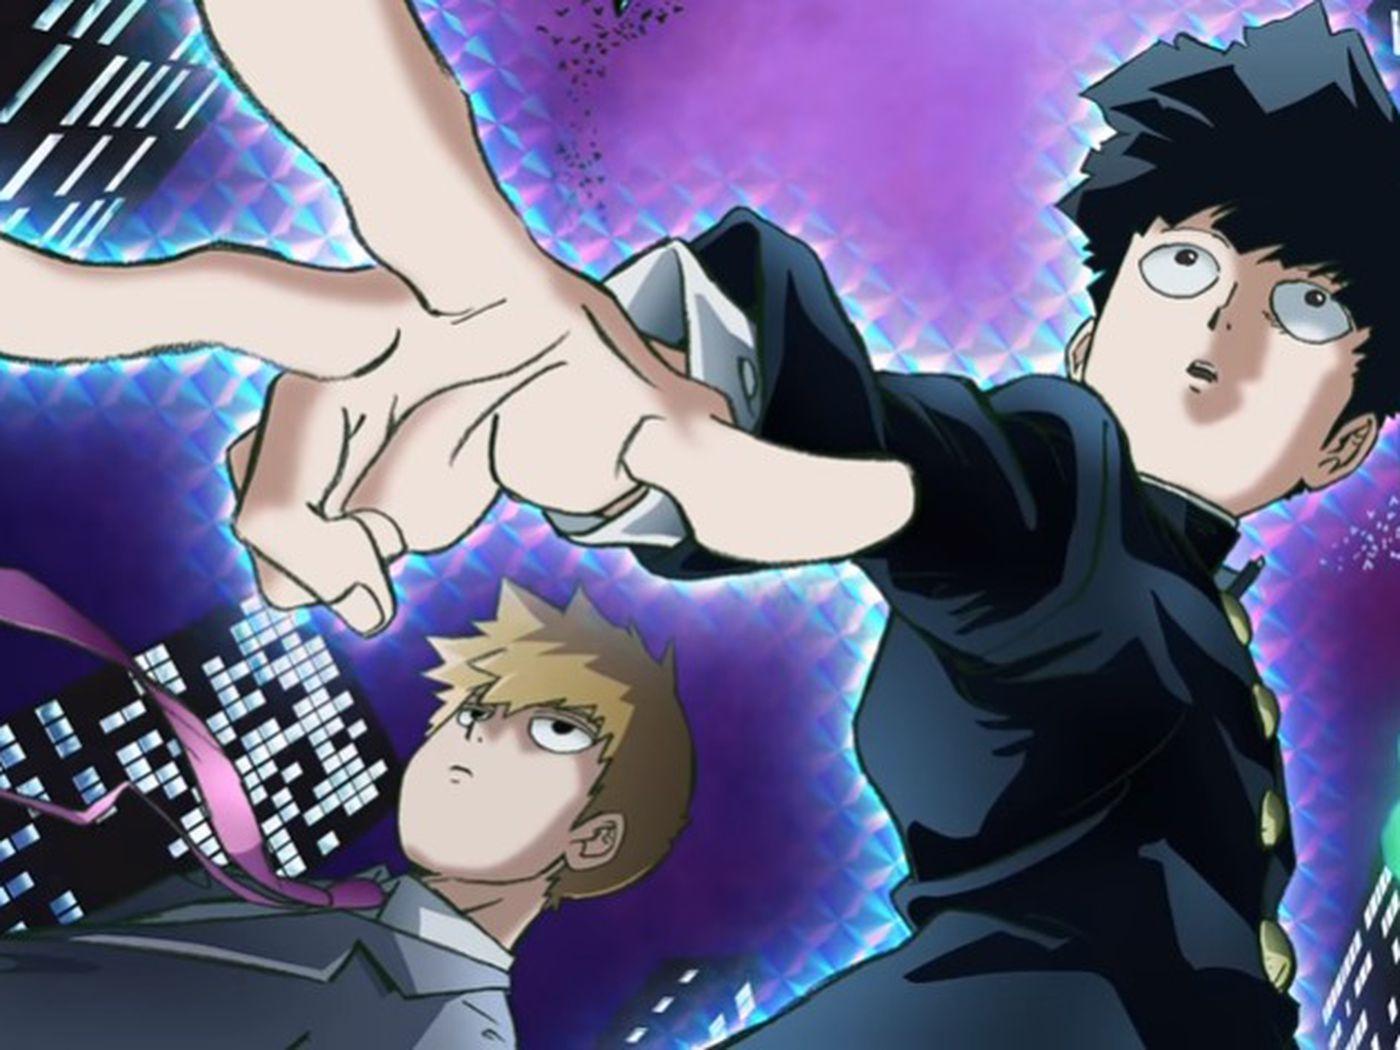 Mob Psycho 100 season 2 will have a special preview